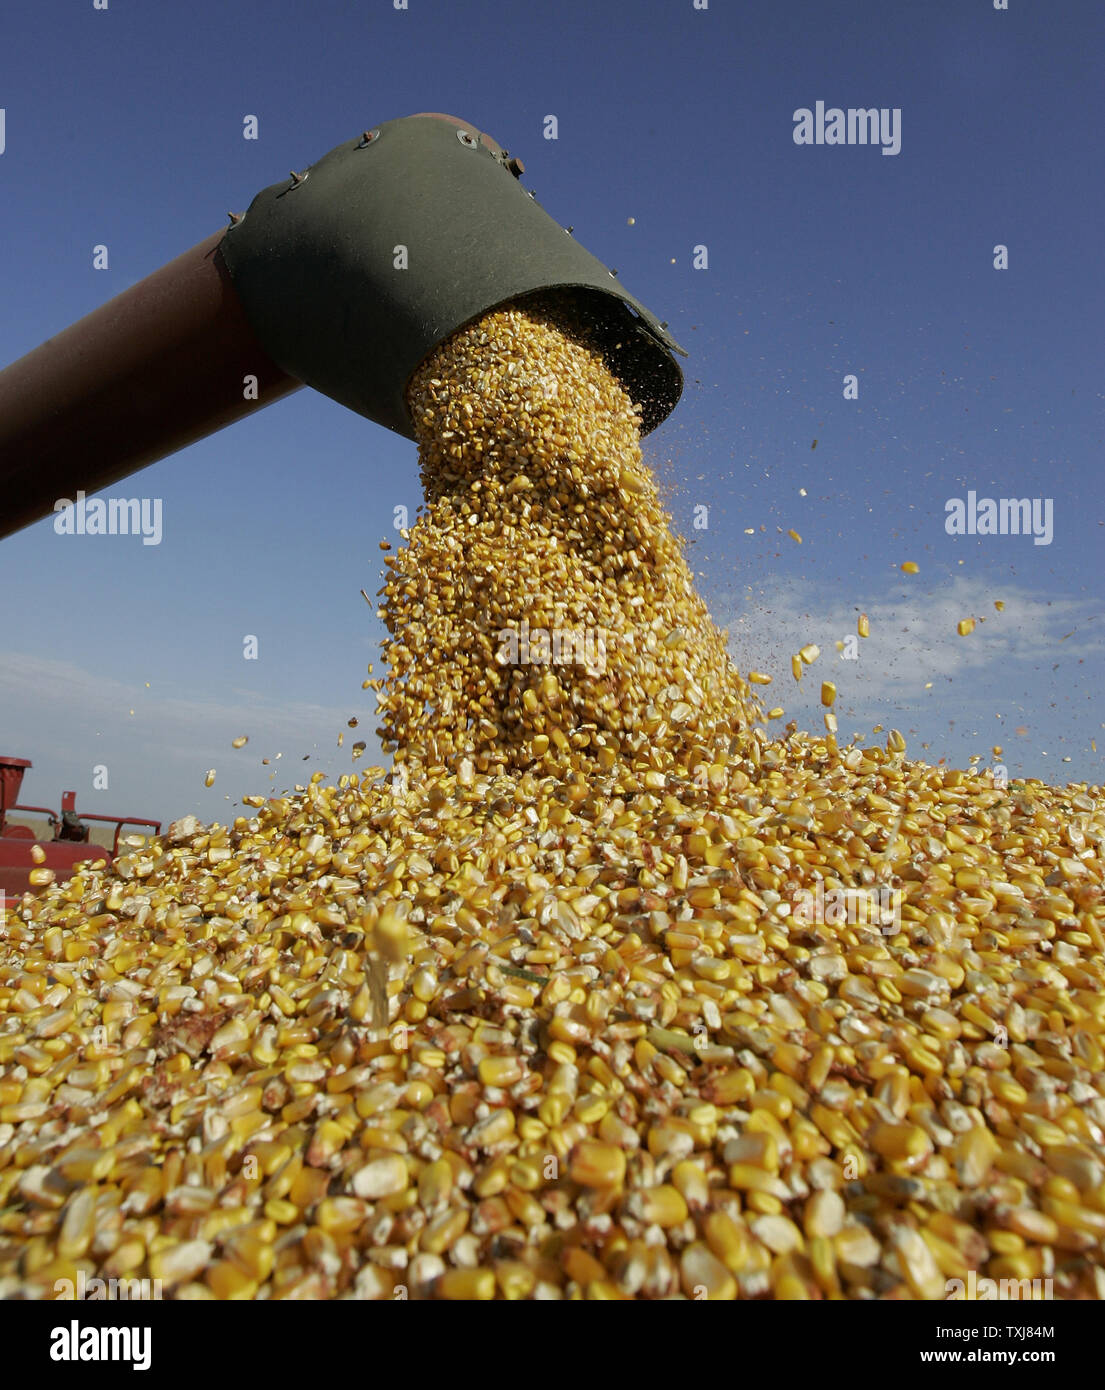 A combine unloads corn on farmland near Manteno, Illinois on October 20, 2008. Corn for December delivery rose $0.155 per bushel at the Chicago Board of Trade closing at $4.185 Monday as rebounding oil markets shift investor focus to commodities. (UPI Photo/Brian Kersey) Stock Photo